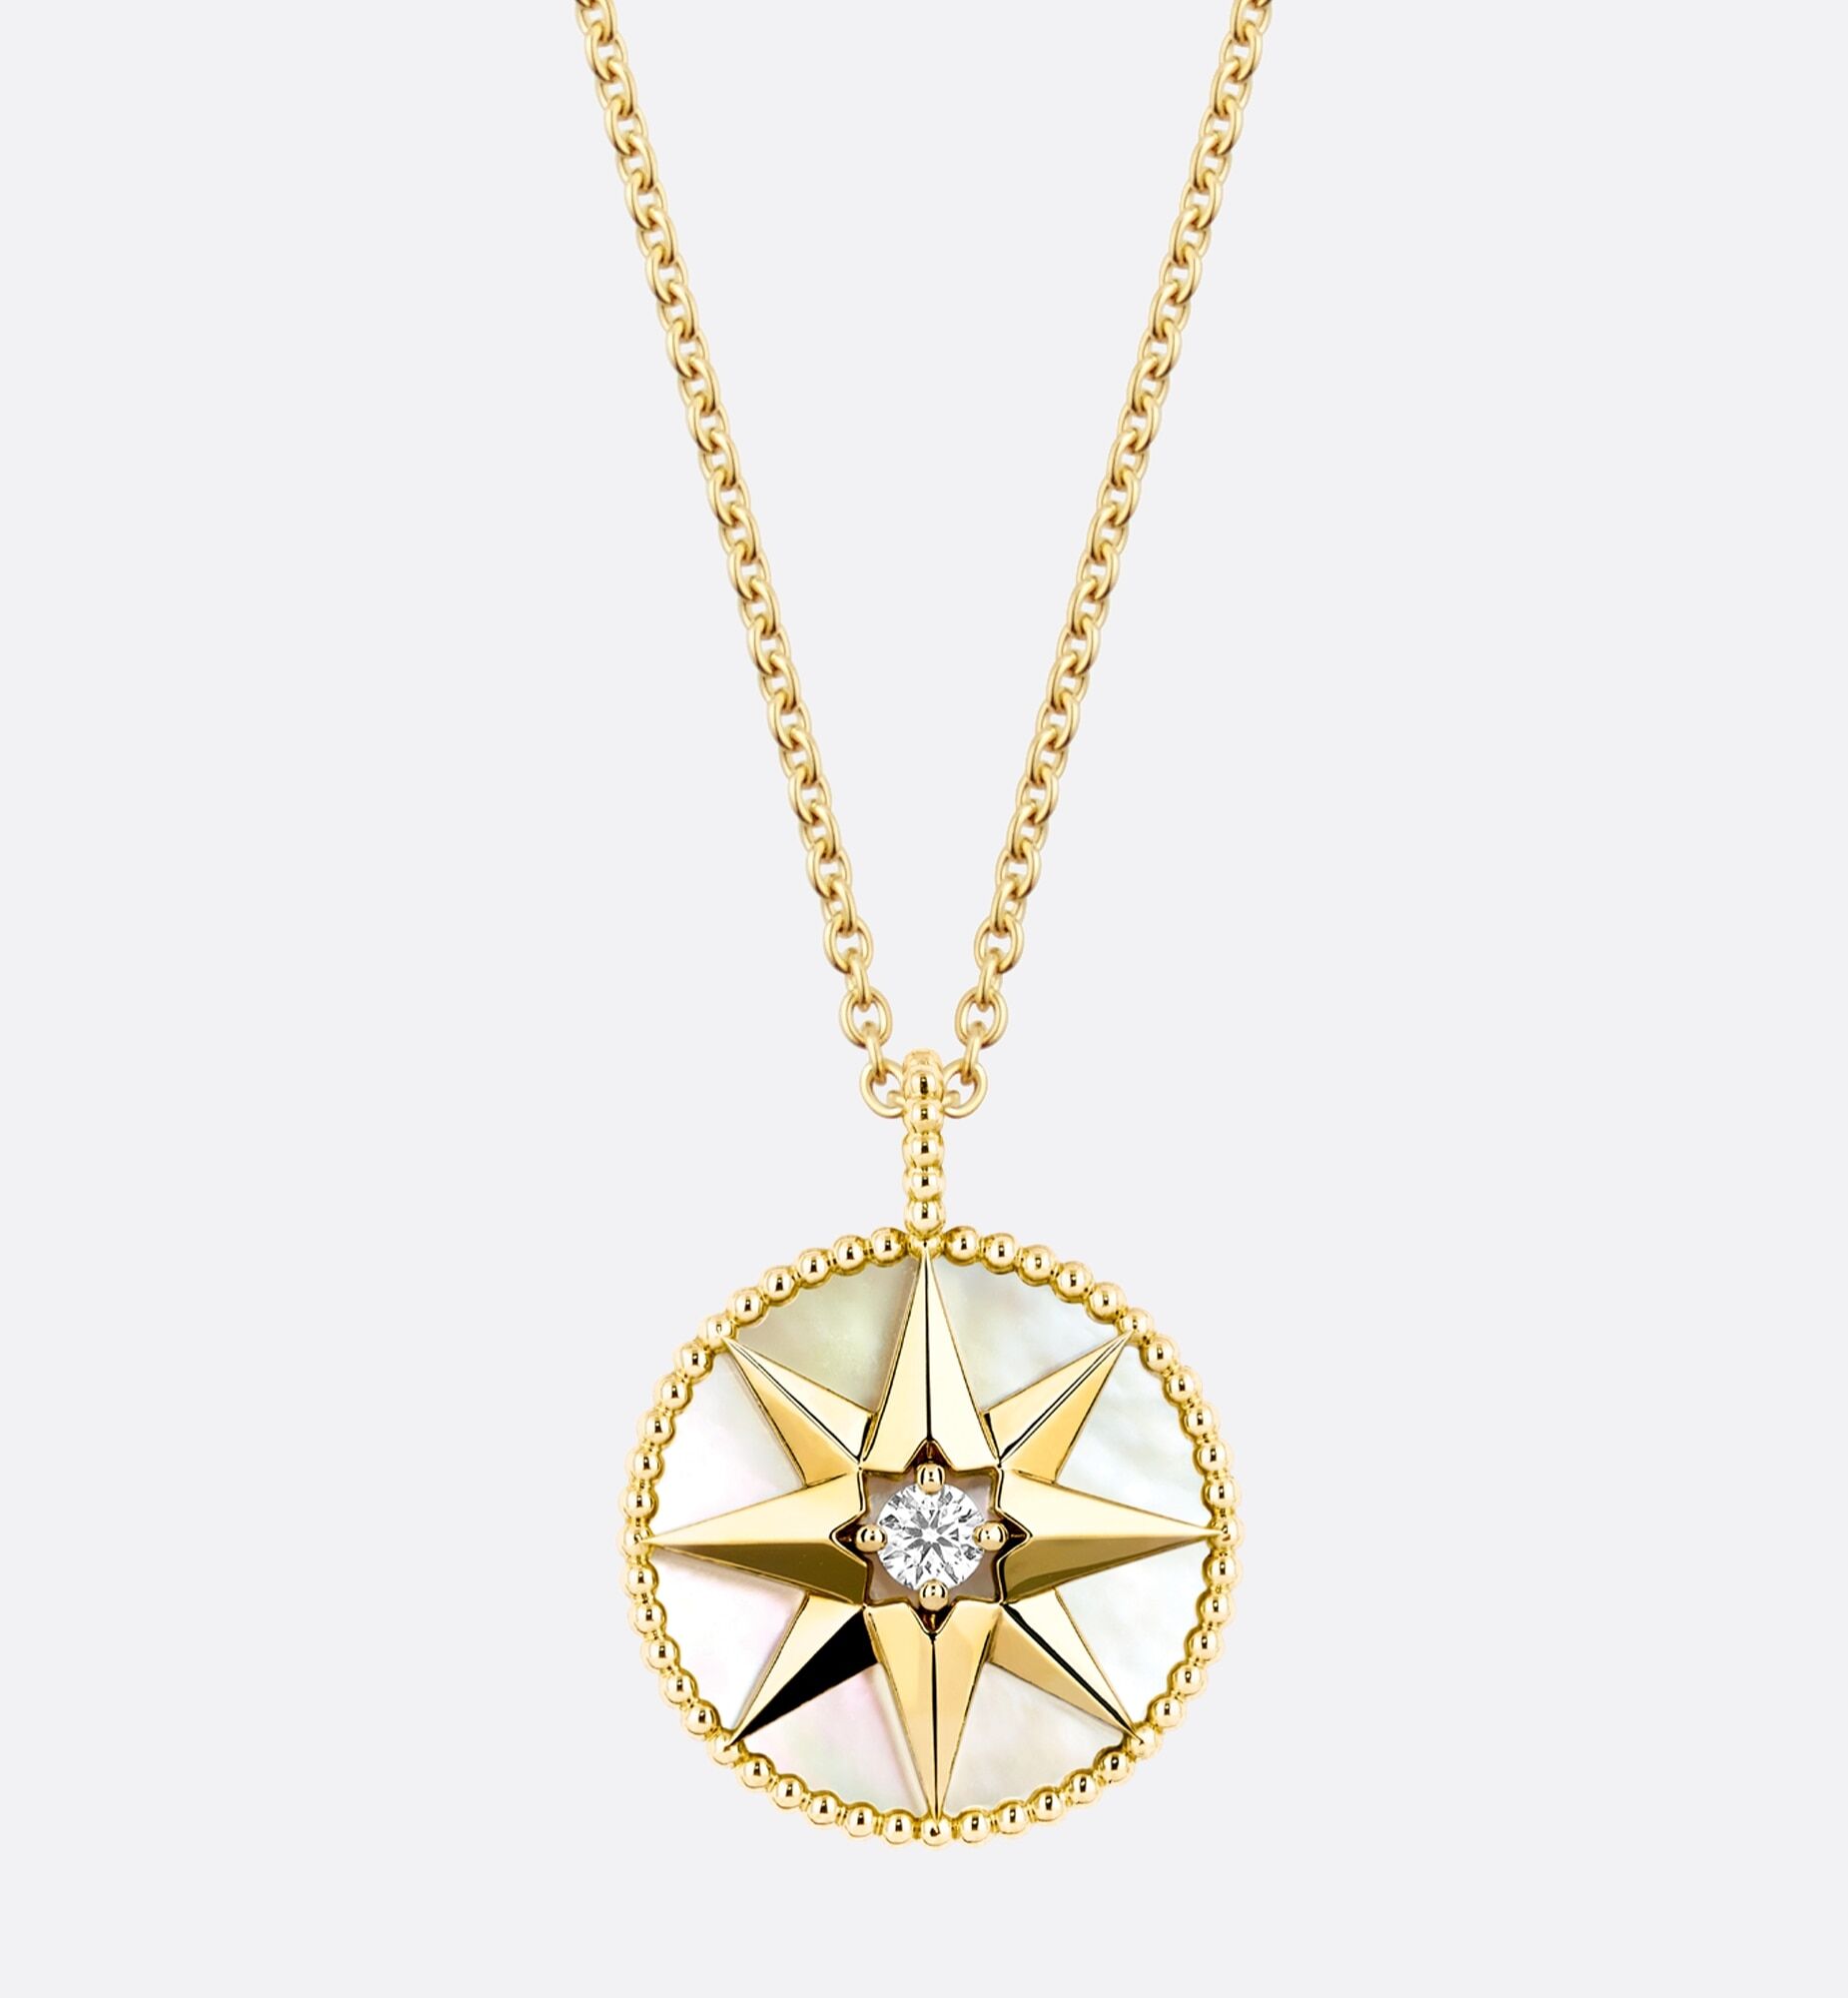 Rose des Vents Medallion Necklace Yellow Gold, Diamond and Mother-of-pearl | DIOR